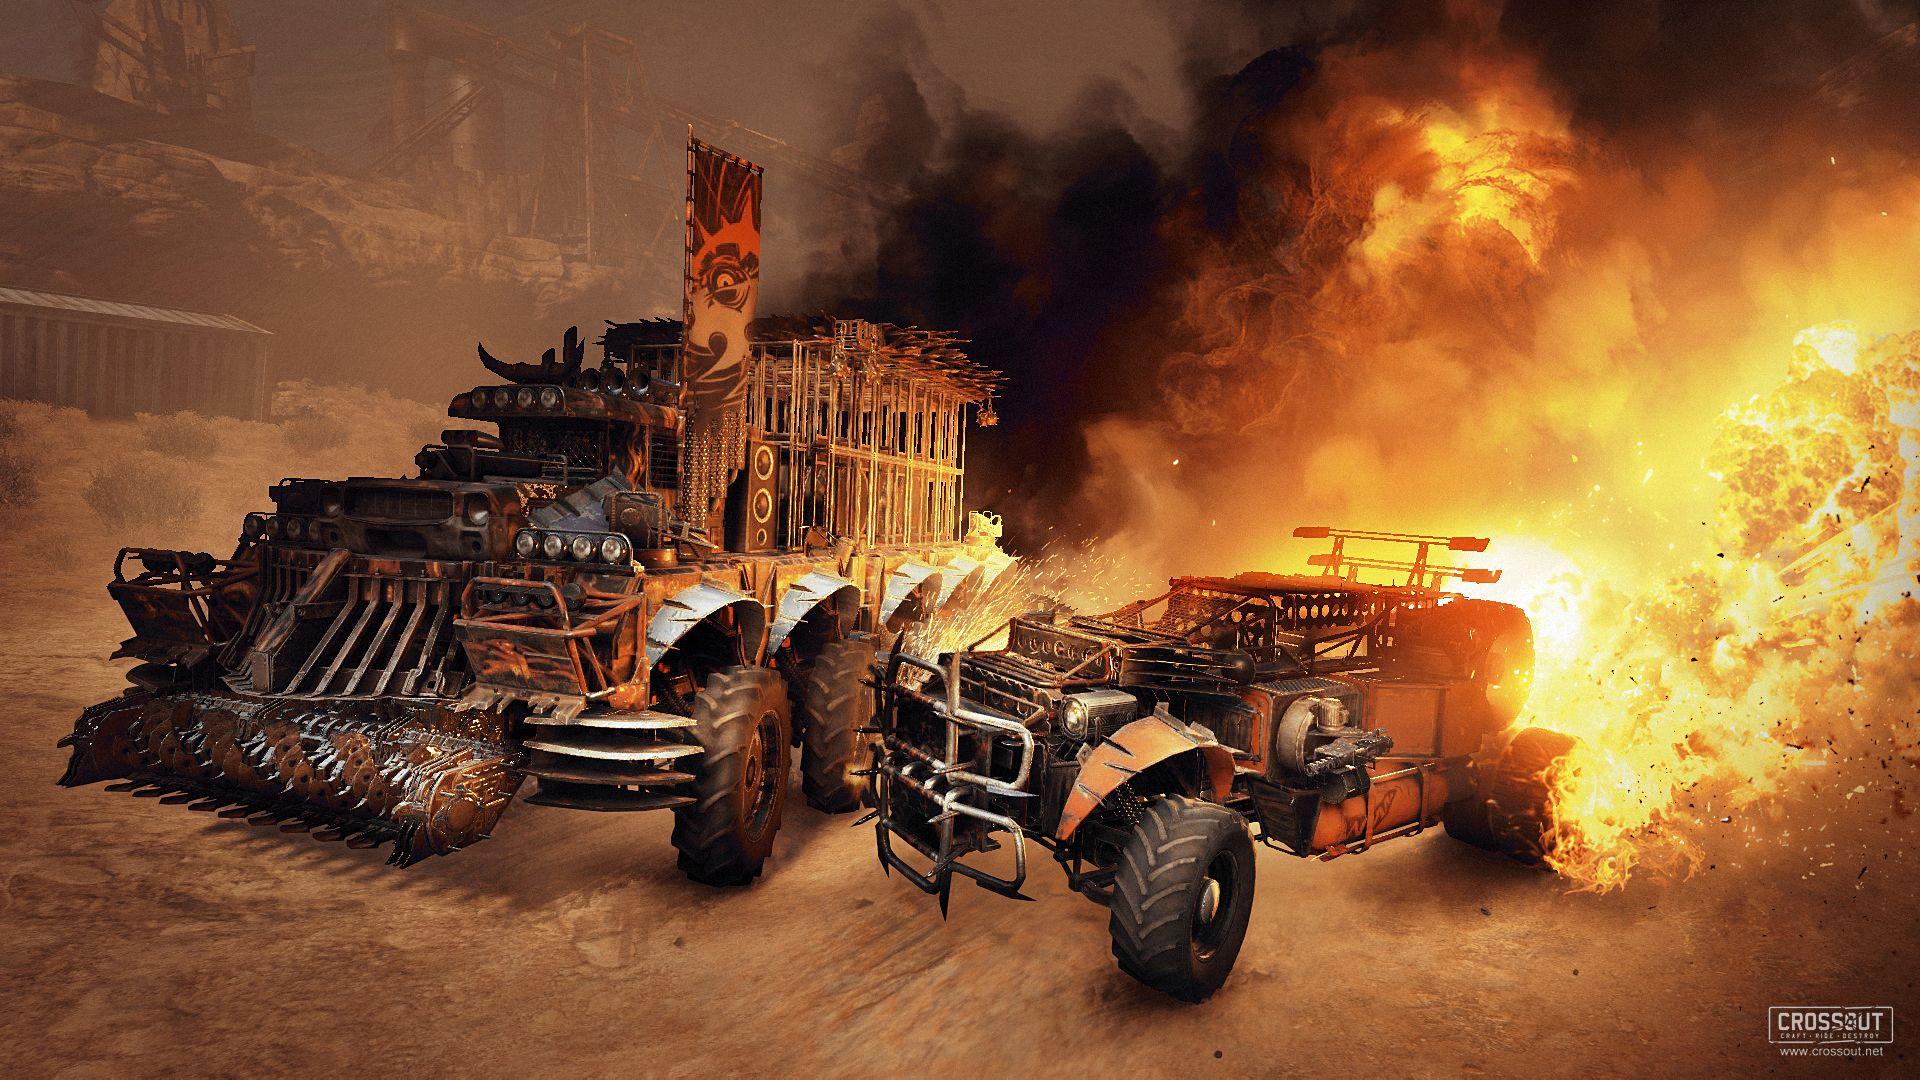 Crossout Cyberpunk Wallpaper, HD Games 4K Wallpapers, Images and